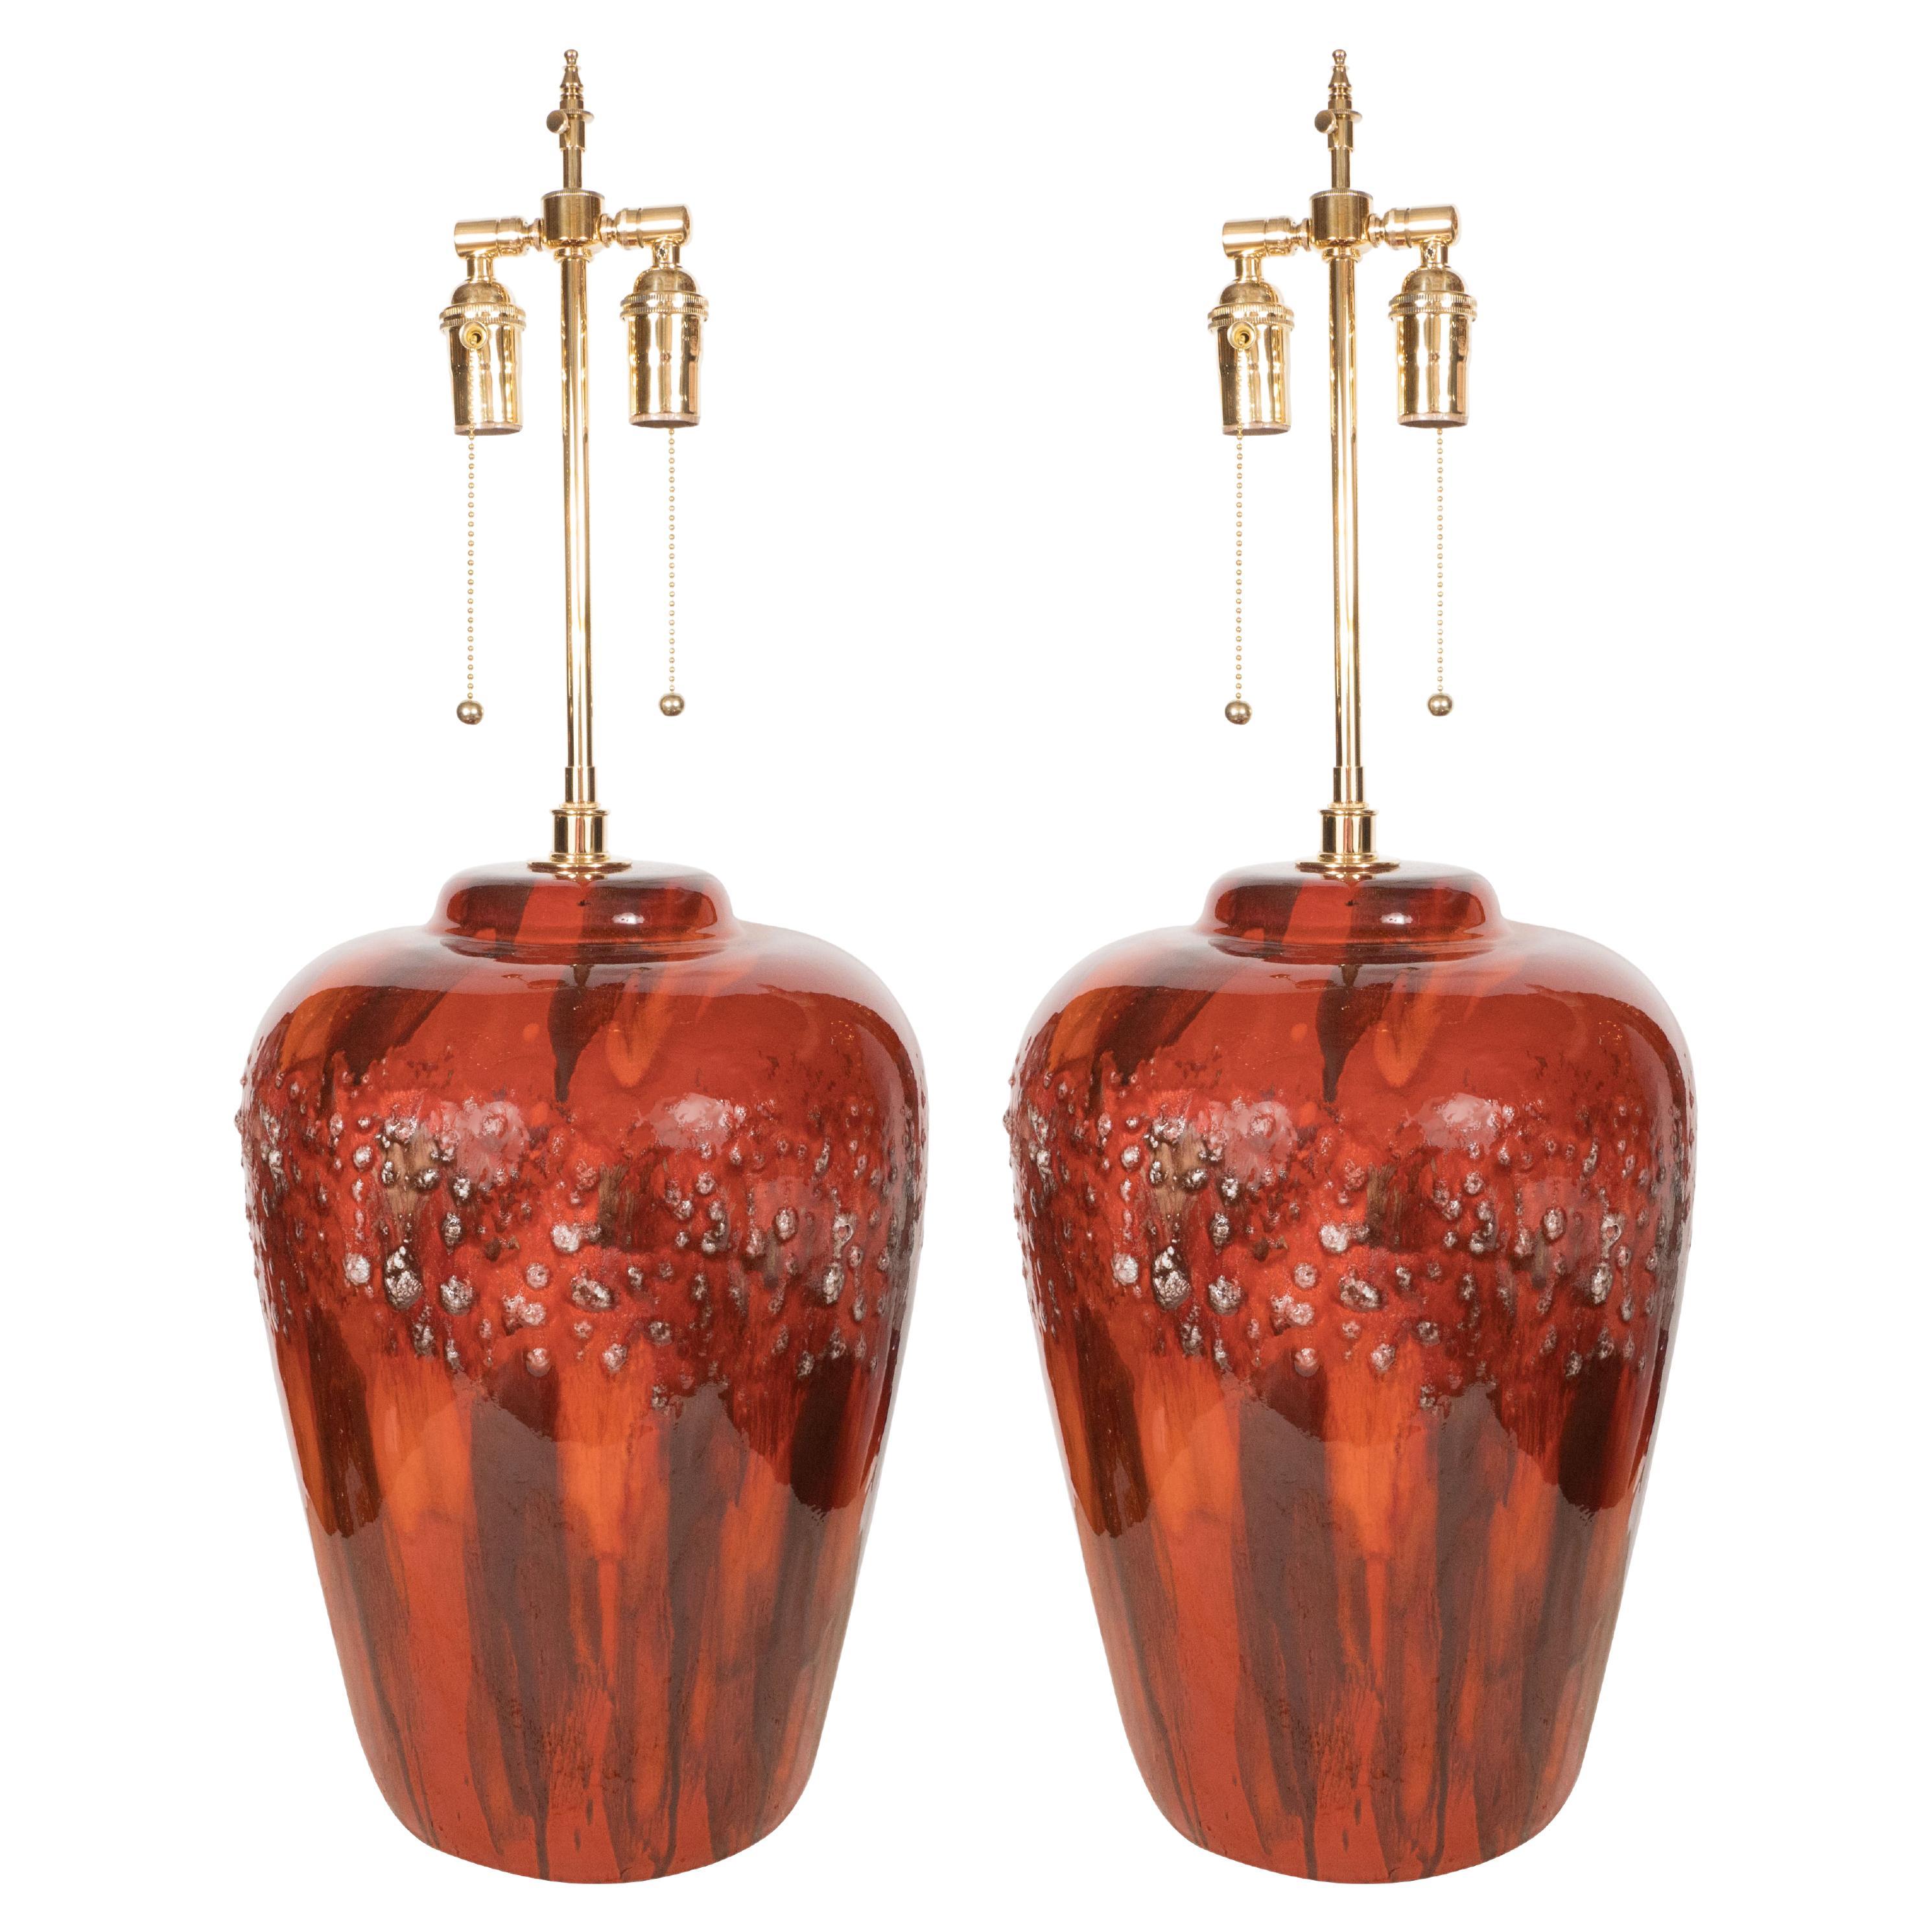 Pair of Red Glazed Pottery Lamps with Brass Details